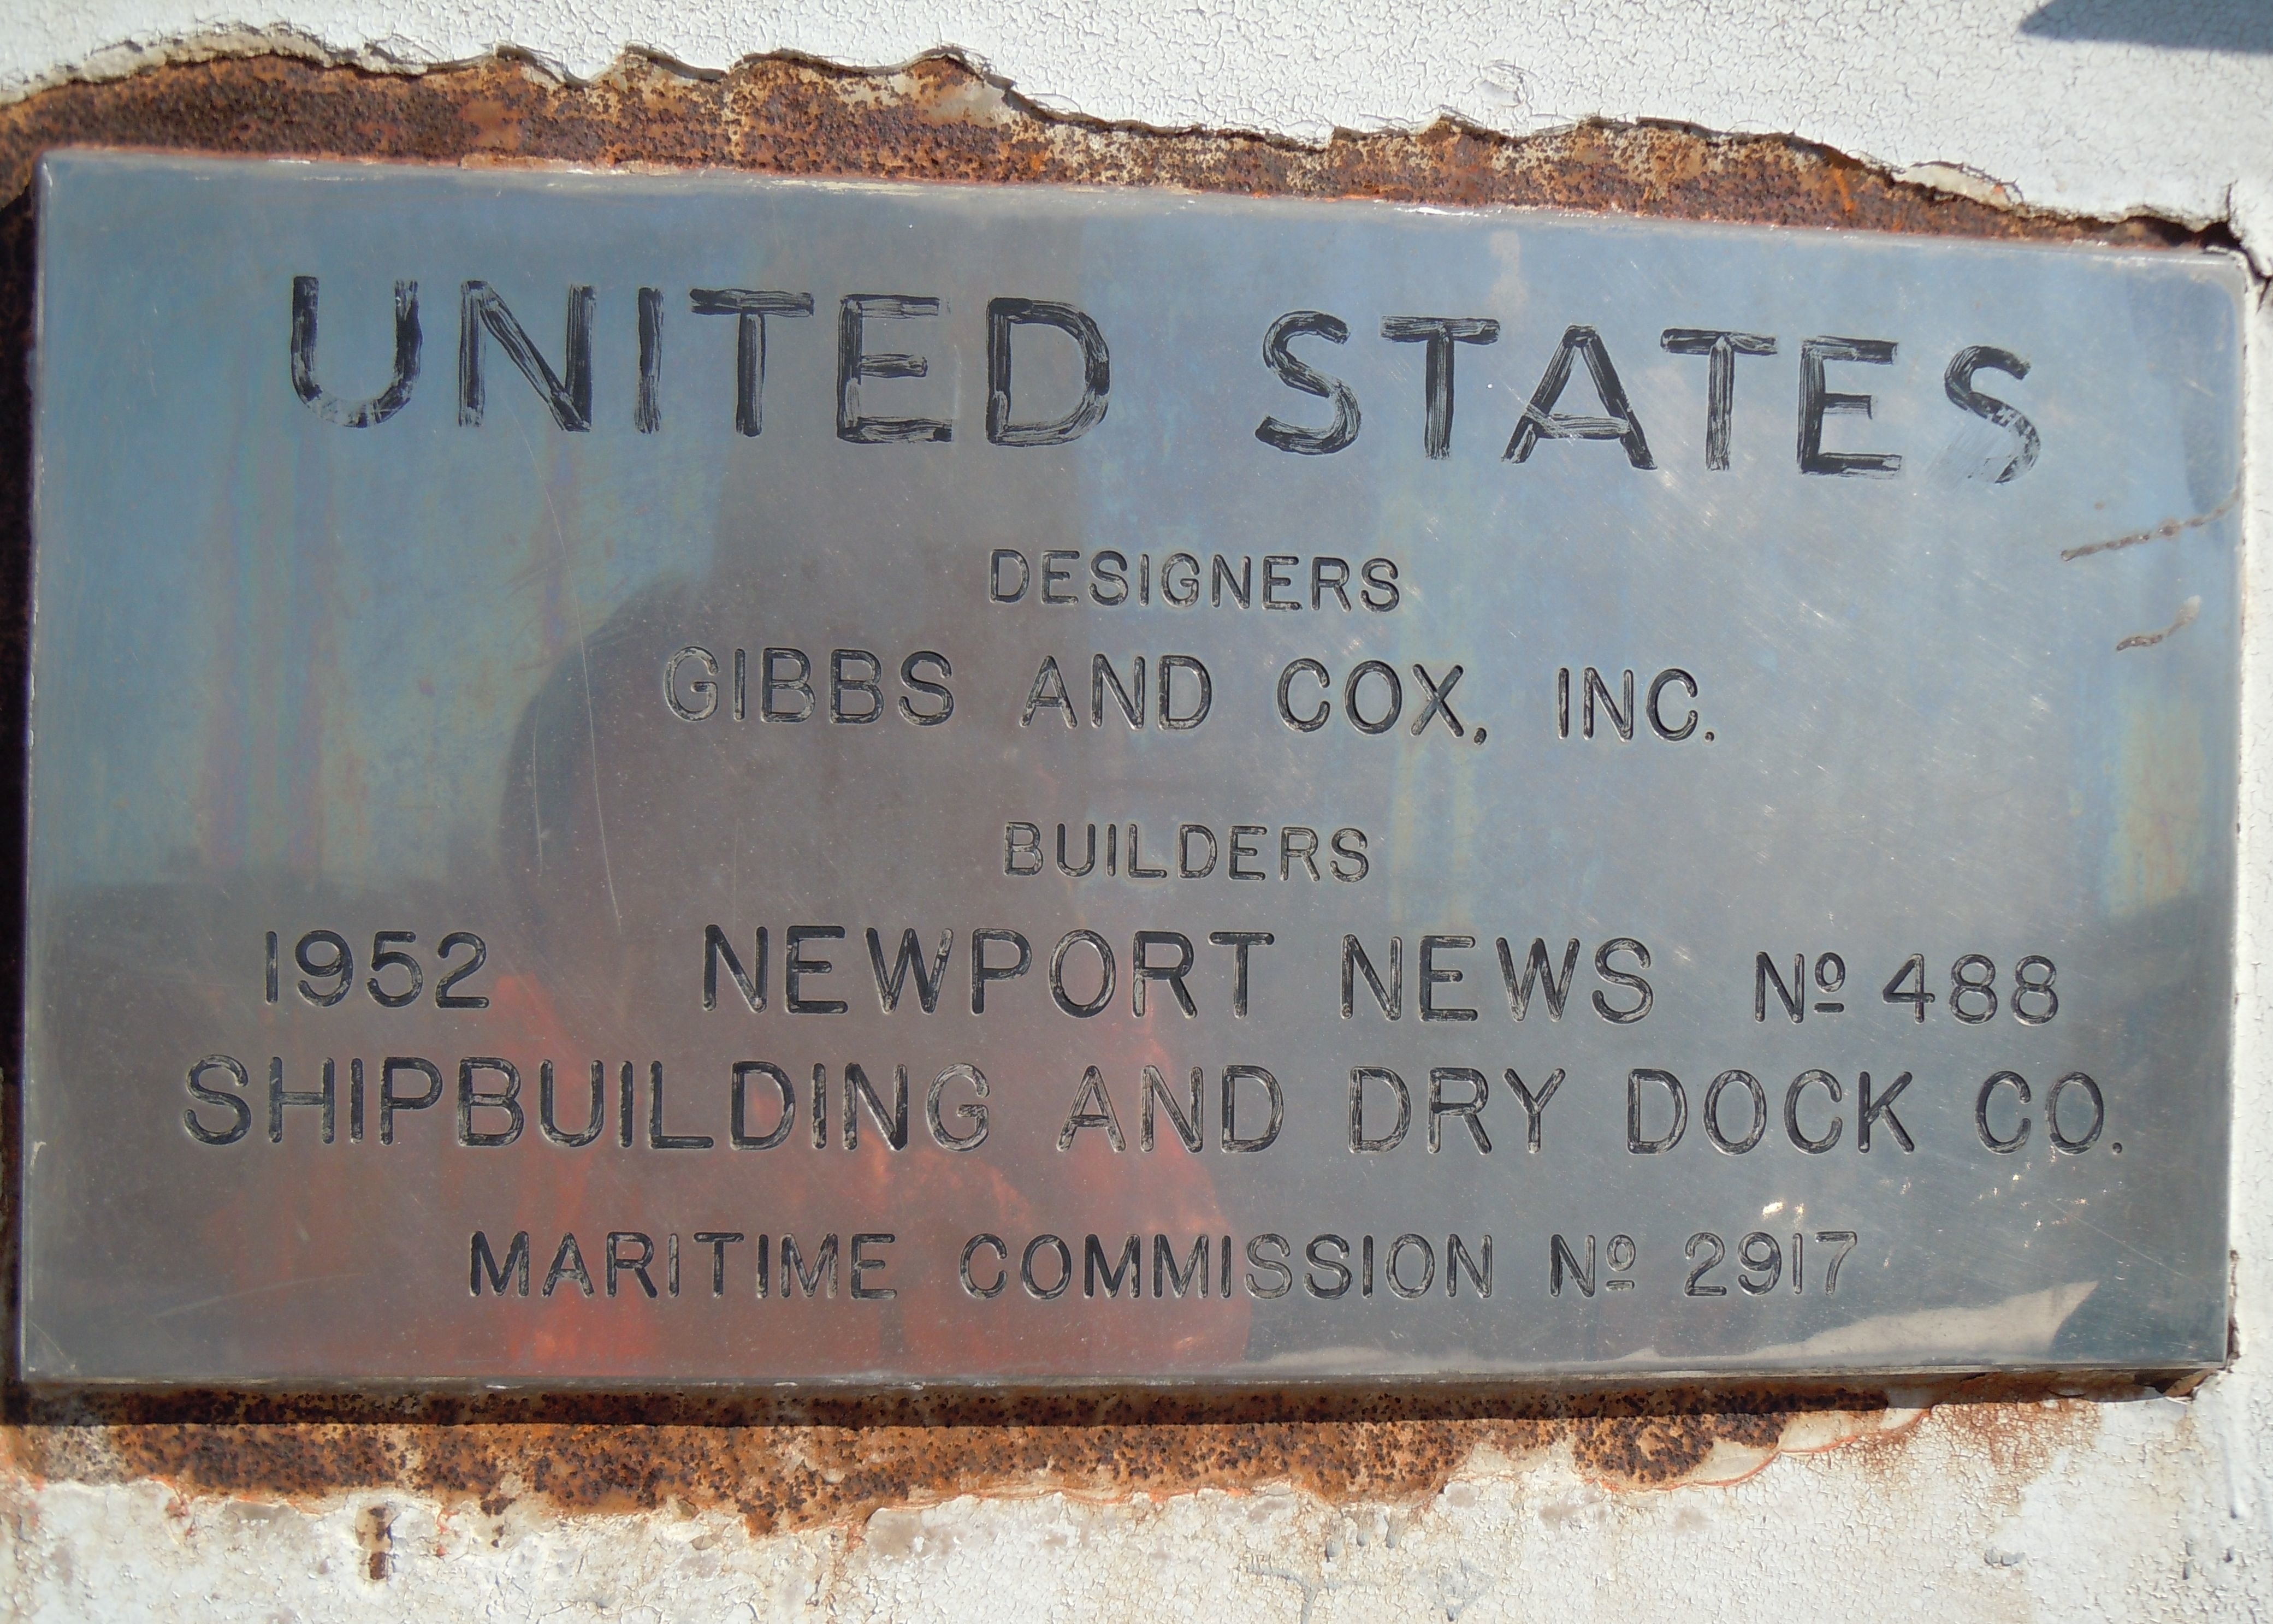 Builder's plaque on SS United States. Photo taken on March 15, 2014.